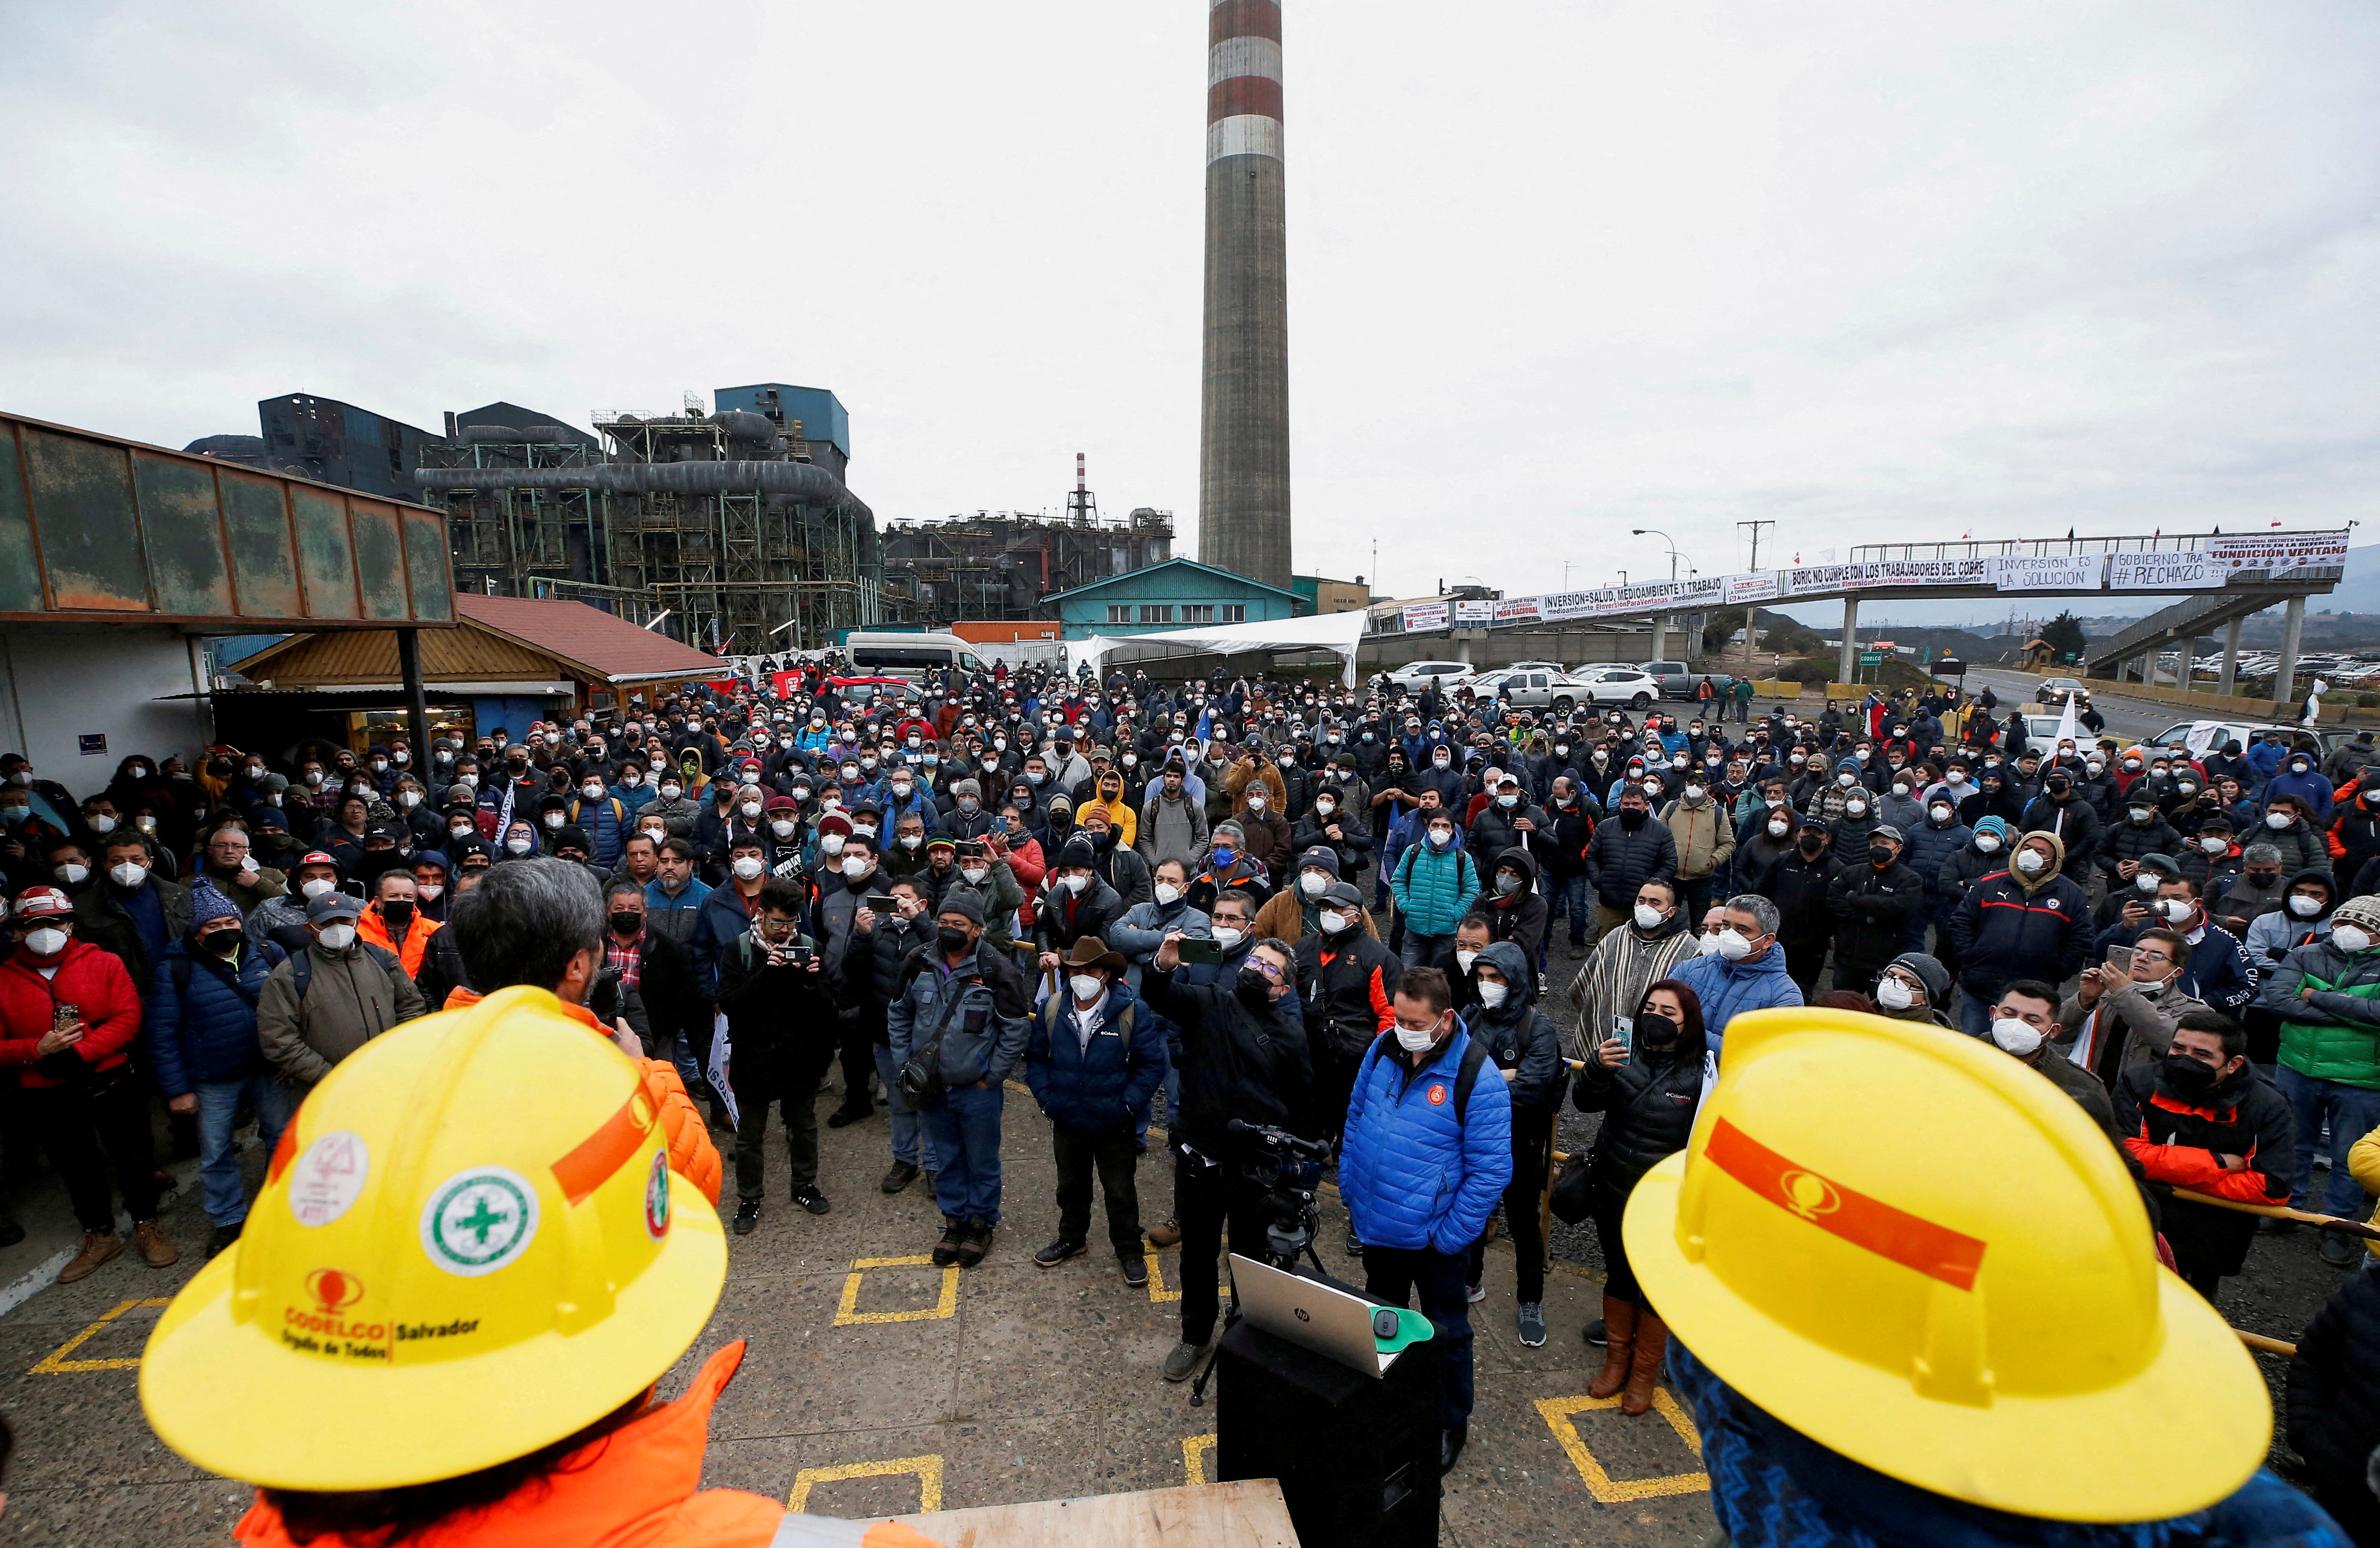 Workers of Codelco's Ventanas copper smelter take part in a rally in support of their job positions outside the smelter, in Ventanas